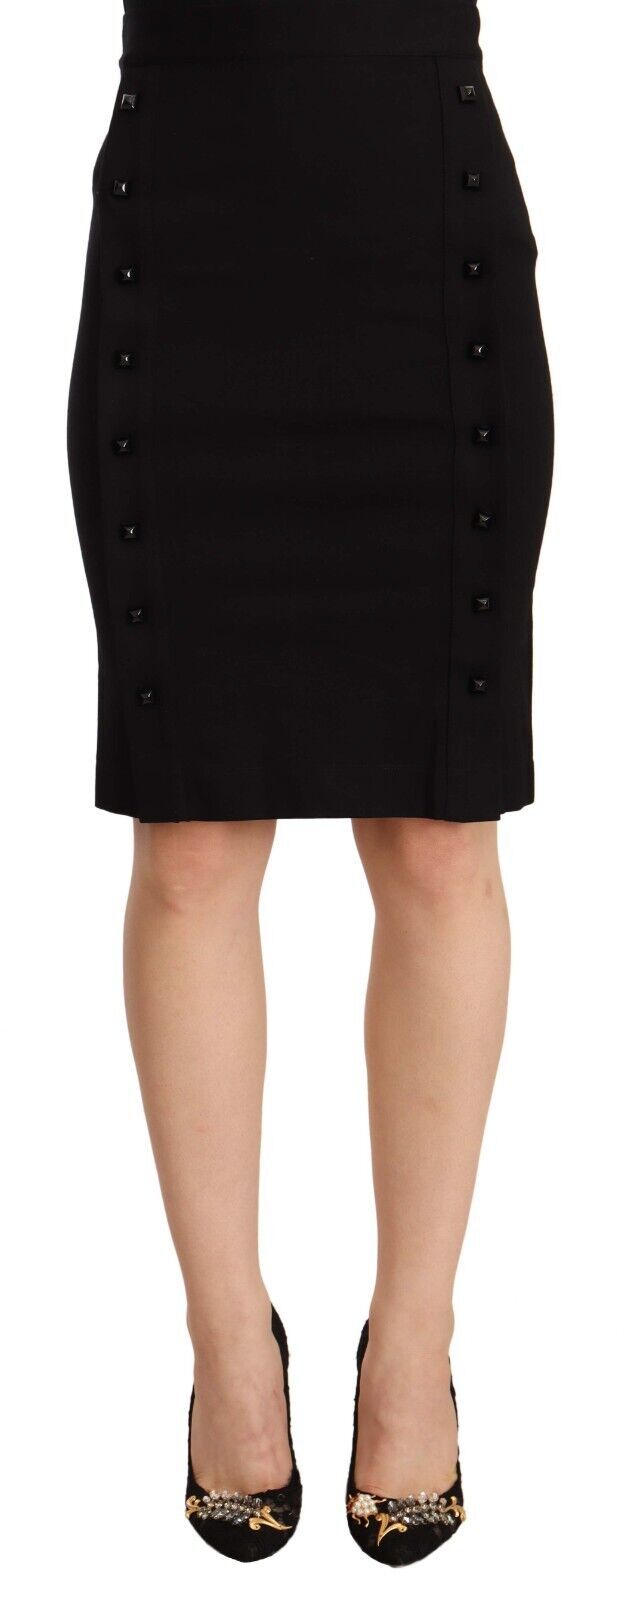 GF Ferre Chic High-Waisted Pencil Skirt in Black